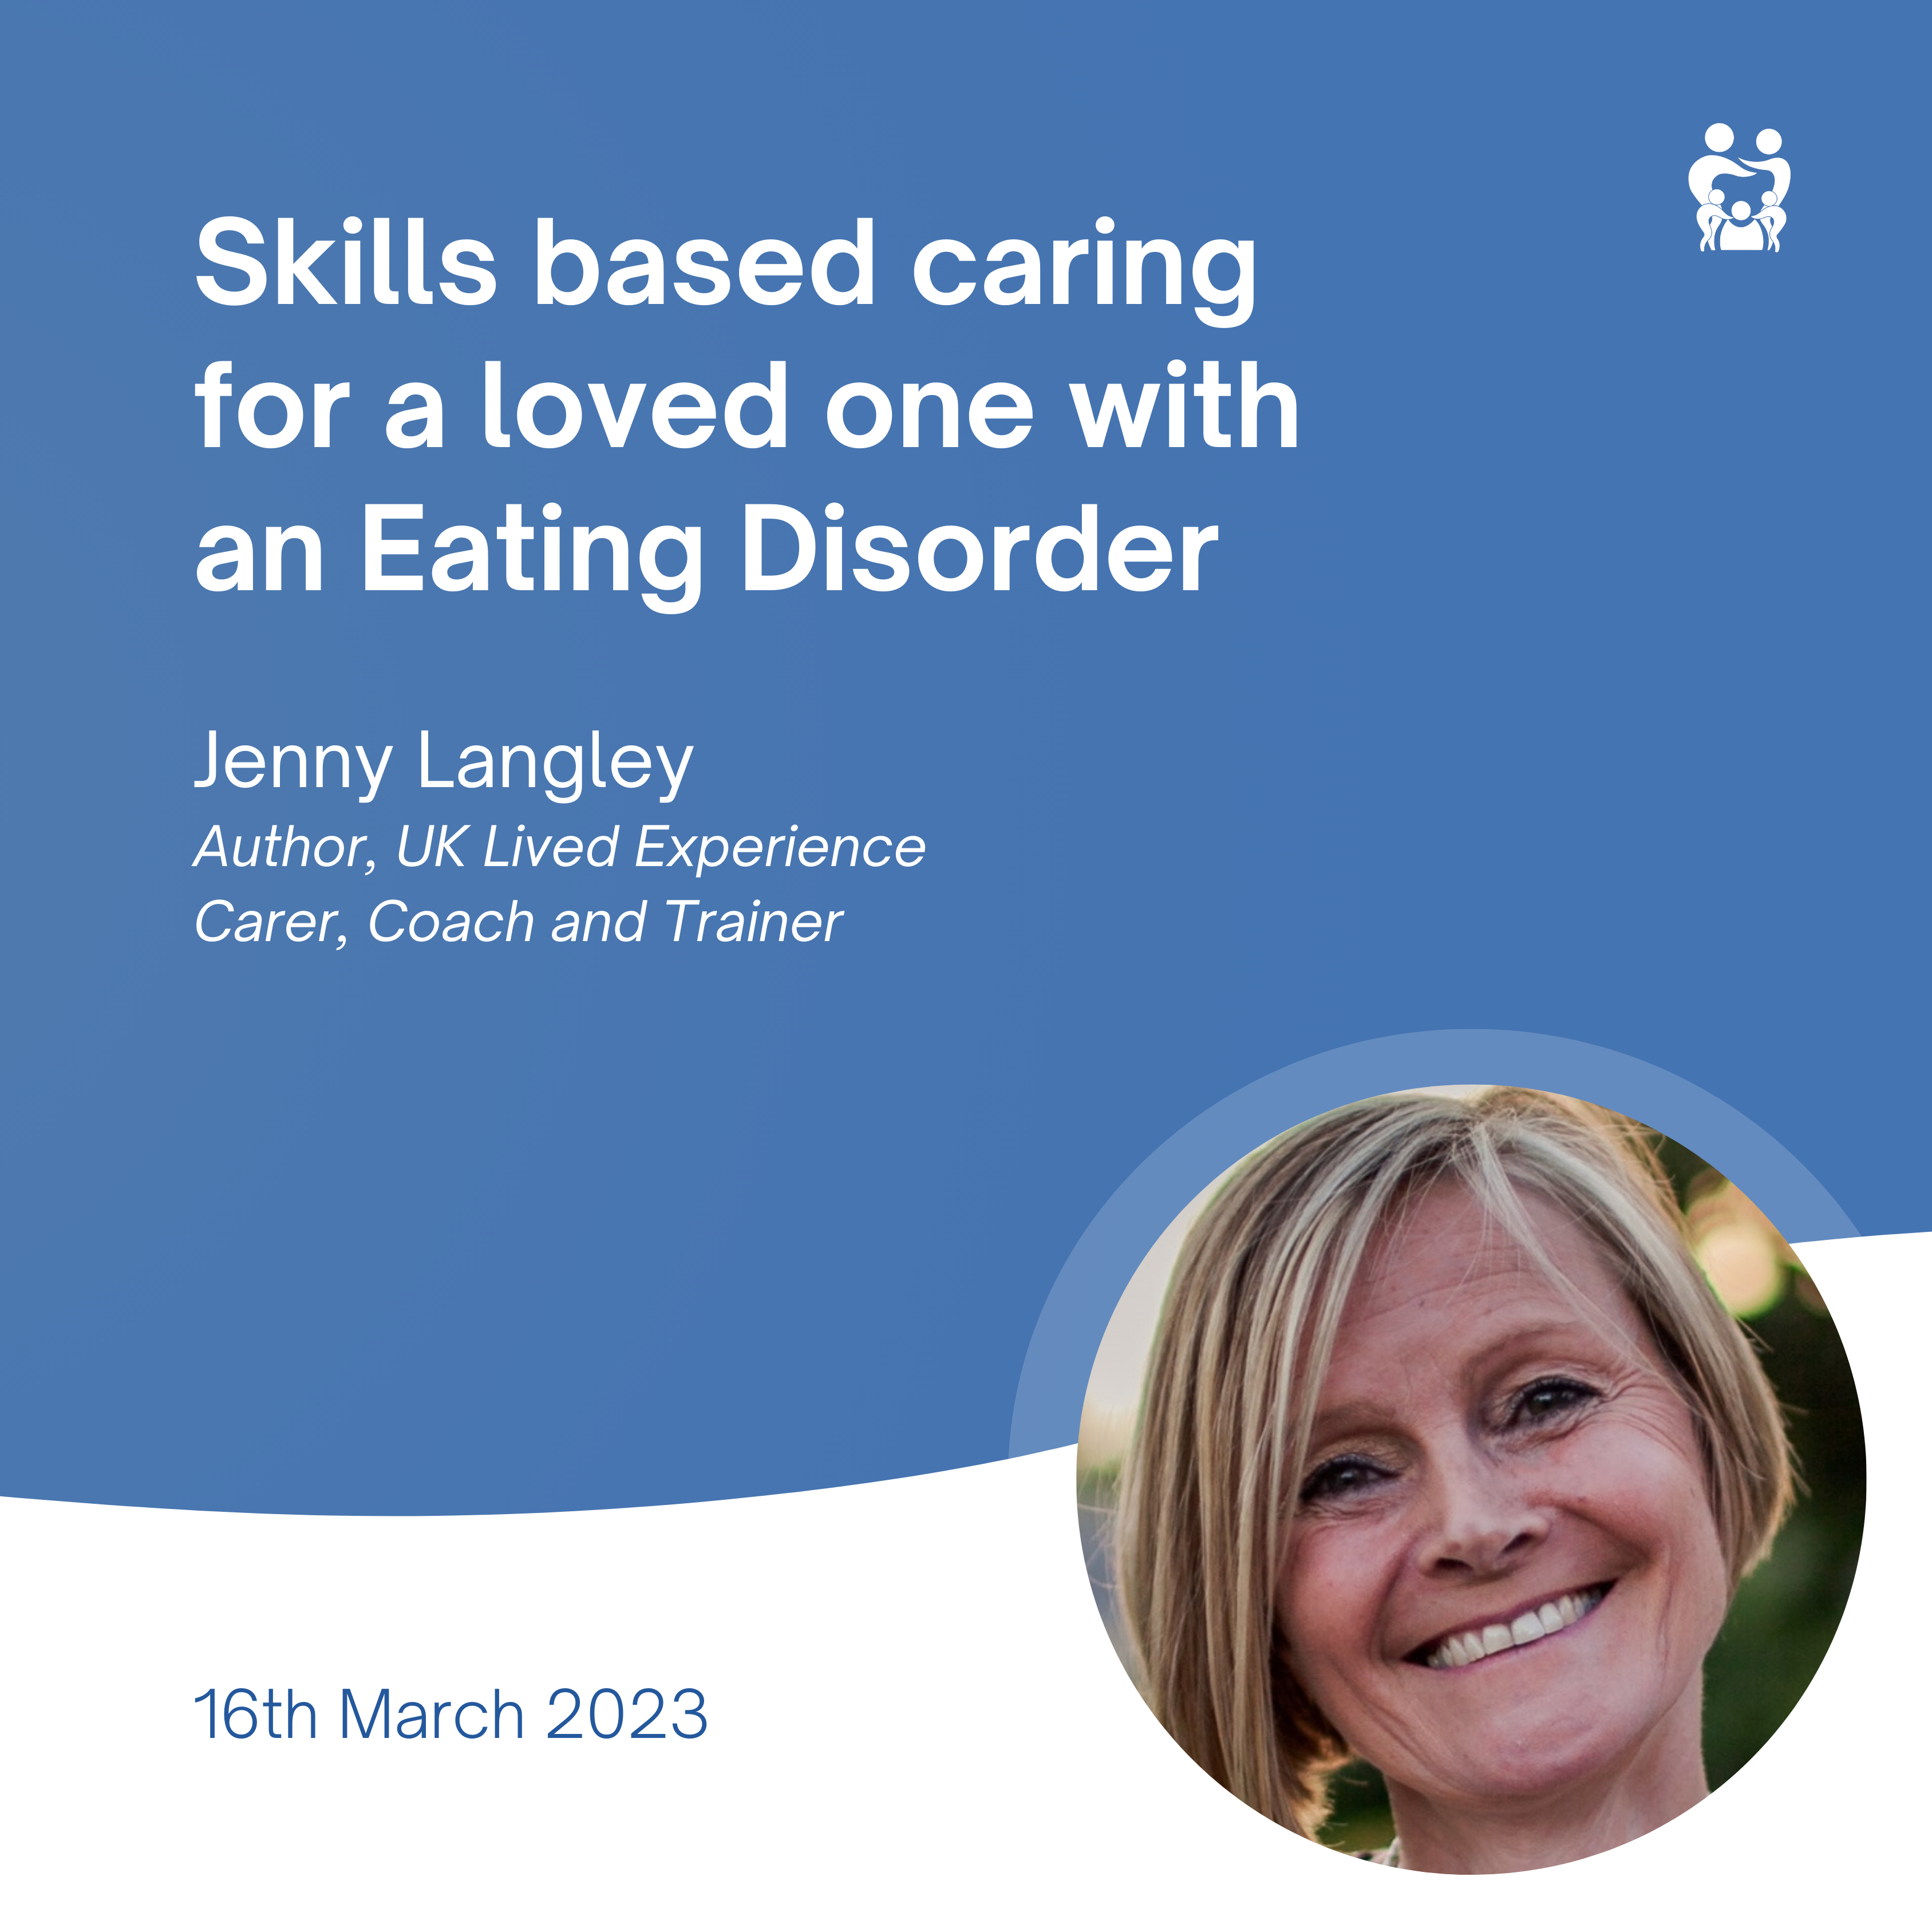 Skills based caring for a loved one with an Eating Disorder - Jenny Langley 16 March 2023